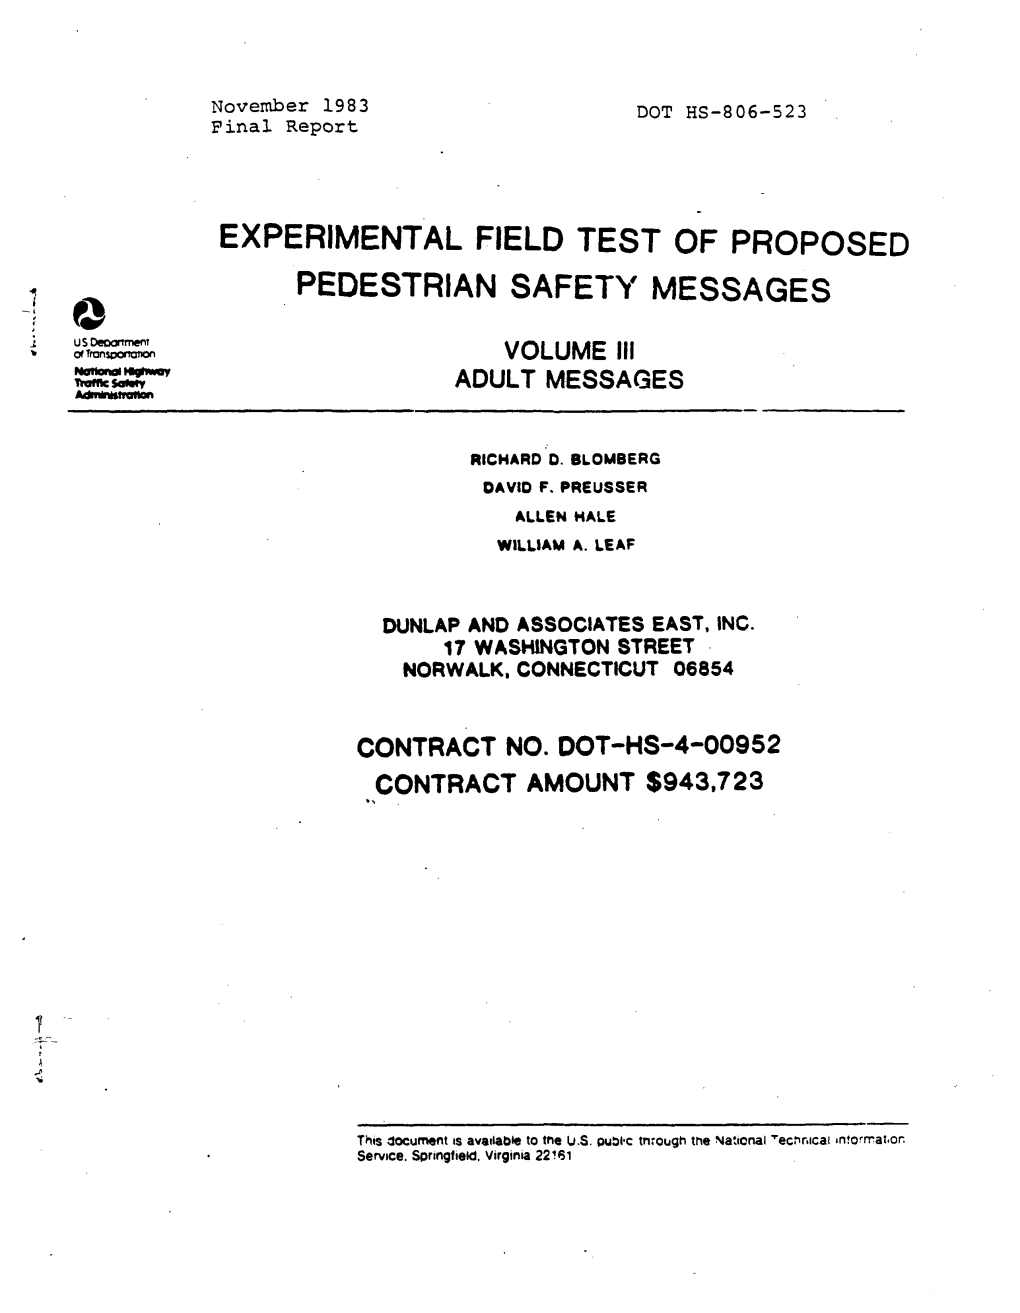 Experimental Field Test of Proposed Pedestrian November 1-983 Safety Messages-Volume III 6